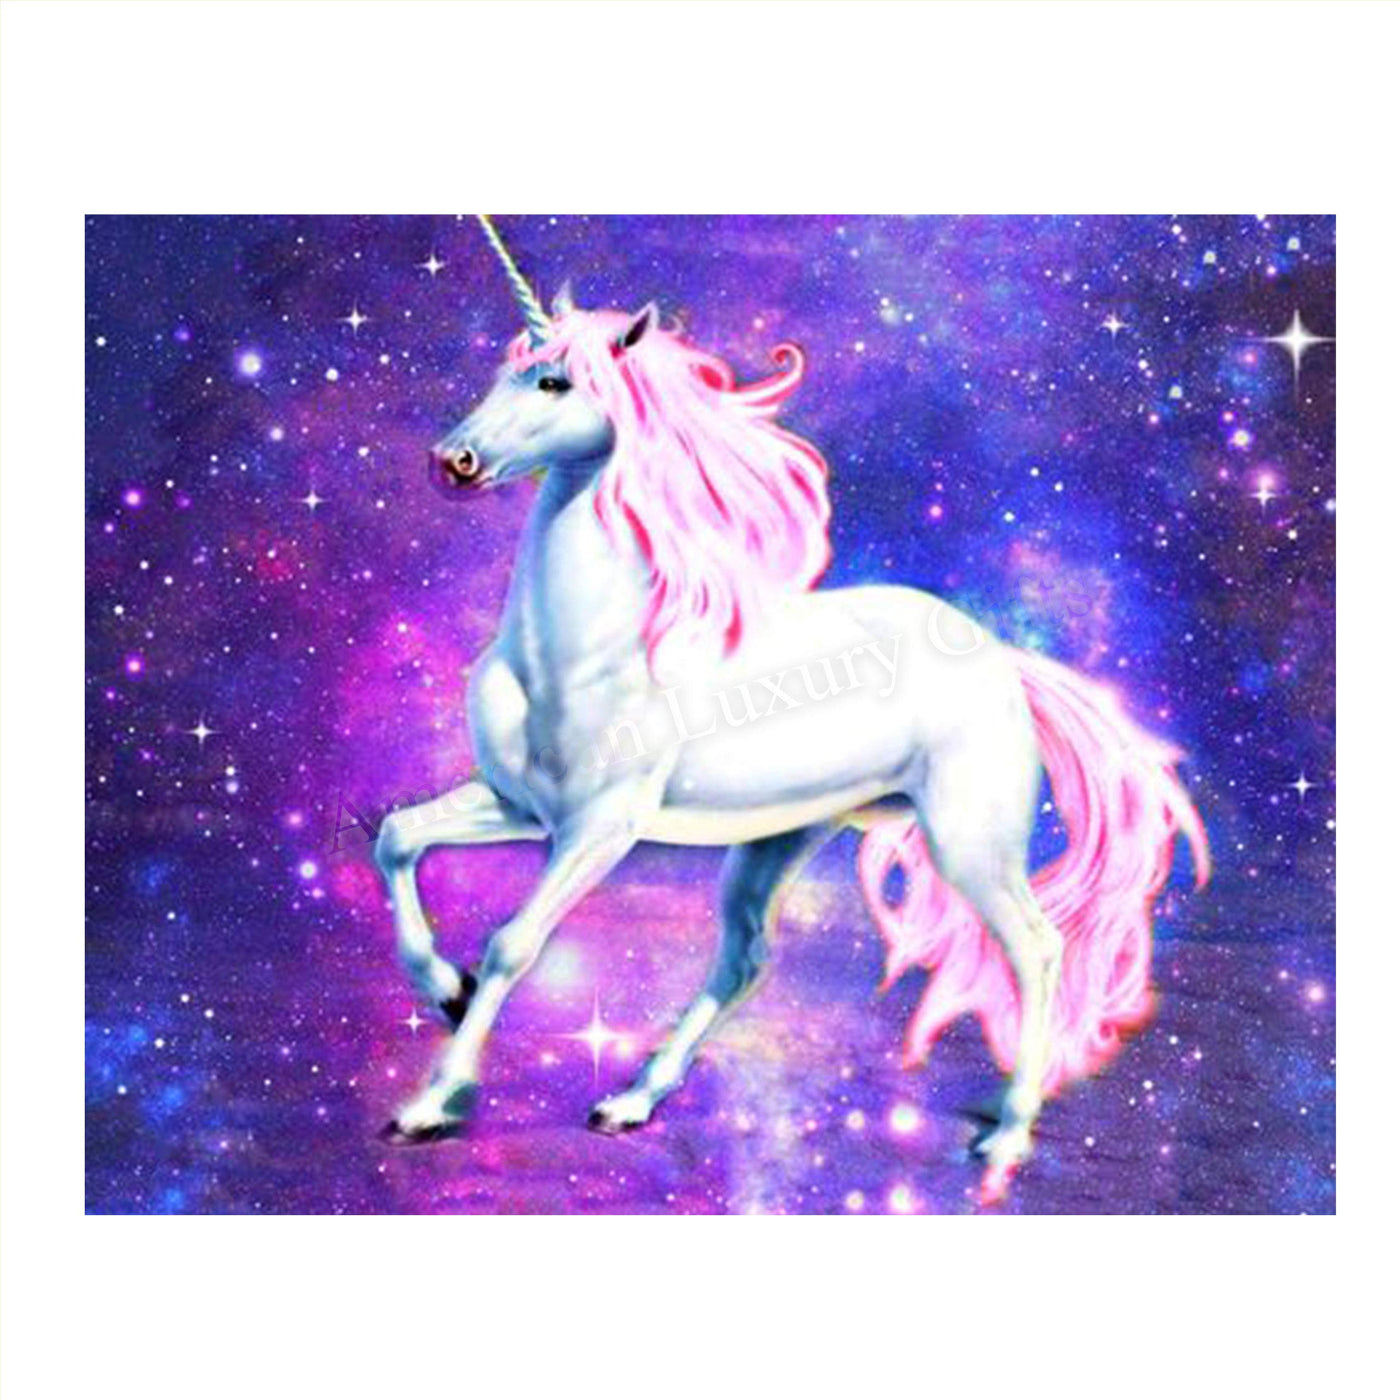 Royal Unicorn & Stardust- 8 x 10" Print Wall Art- Ready to Frame- Home D?cor, Nursery D?cor & Wall Prints for Animal Themes & Children's Bedroom Wall Decor. Just Too Cute!